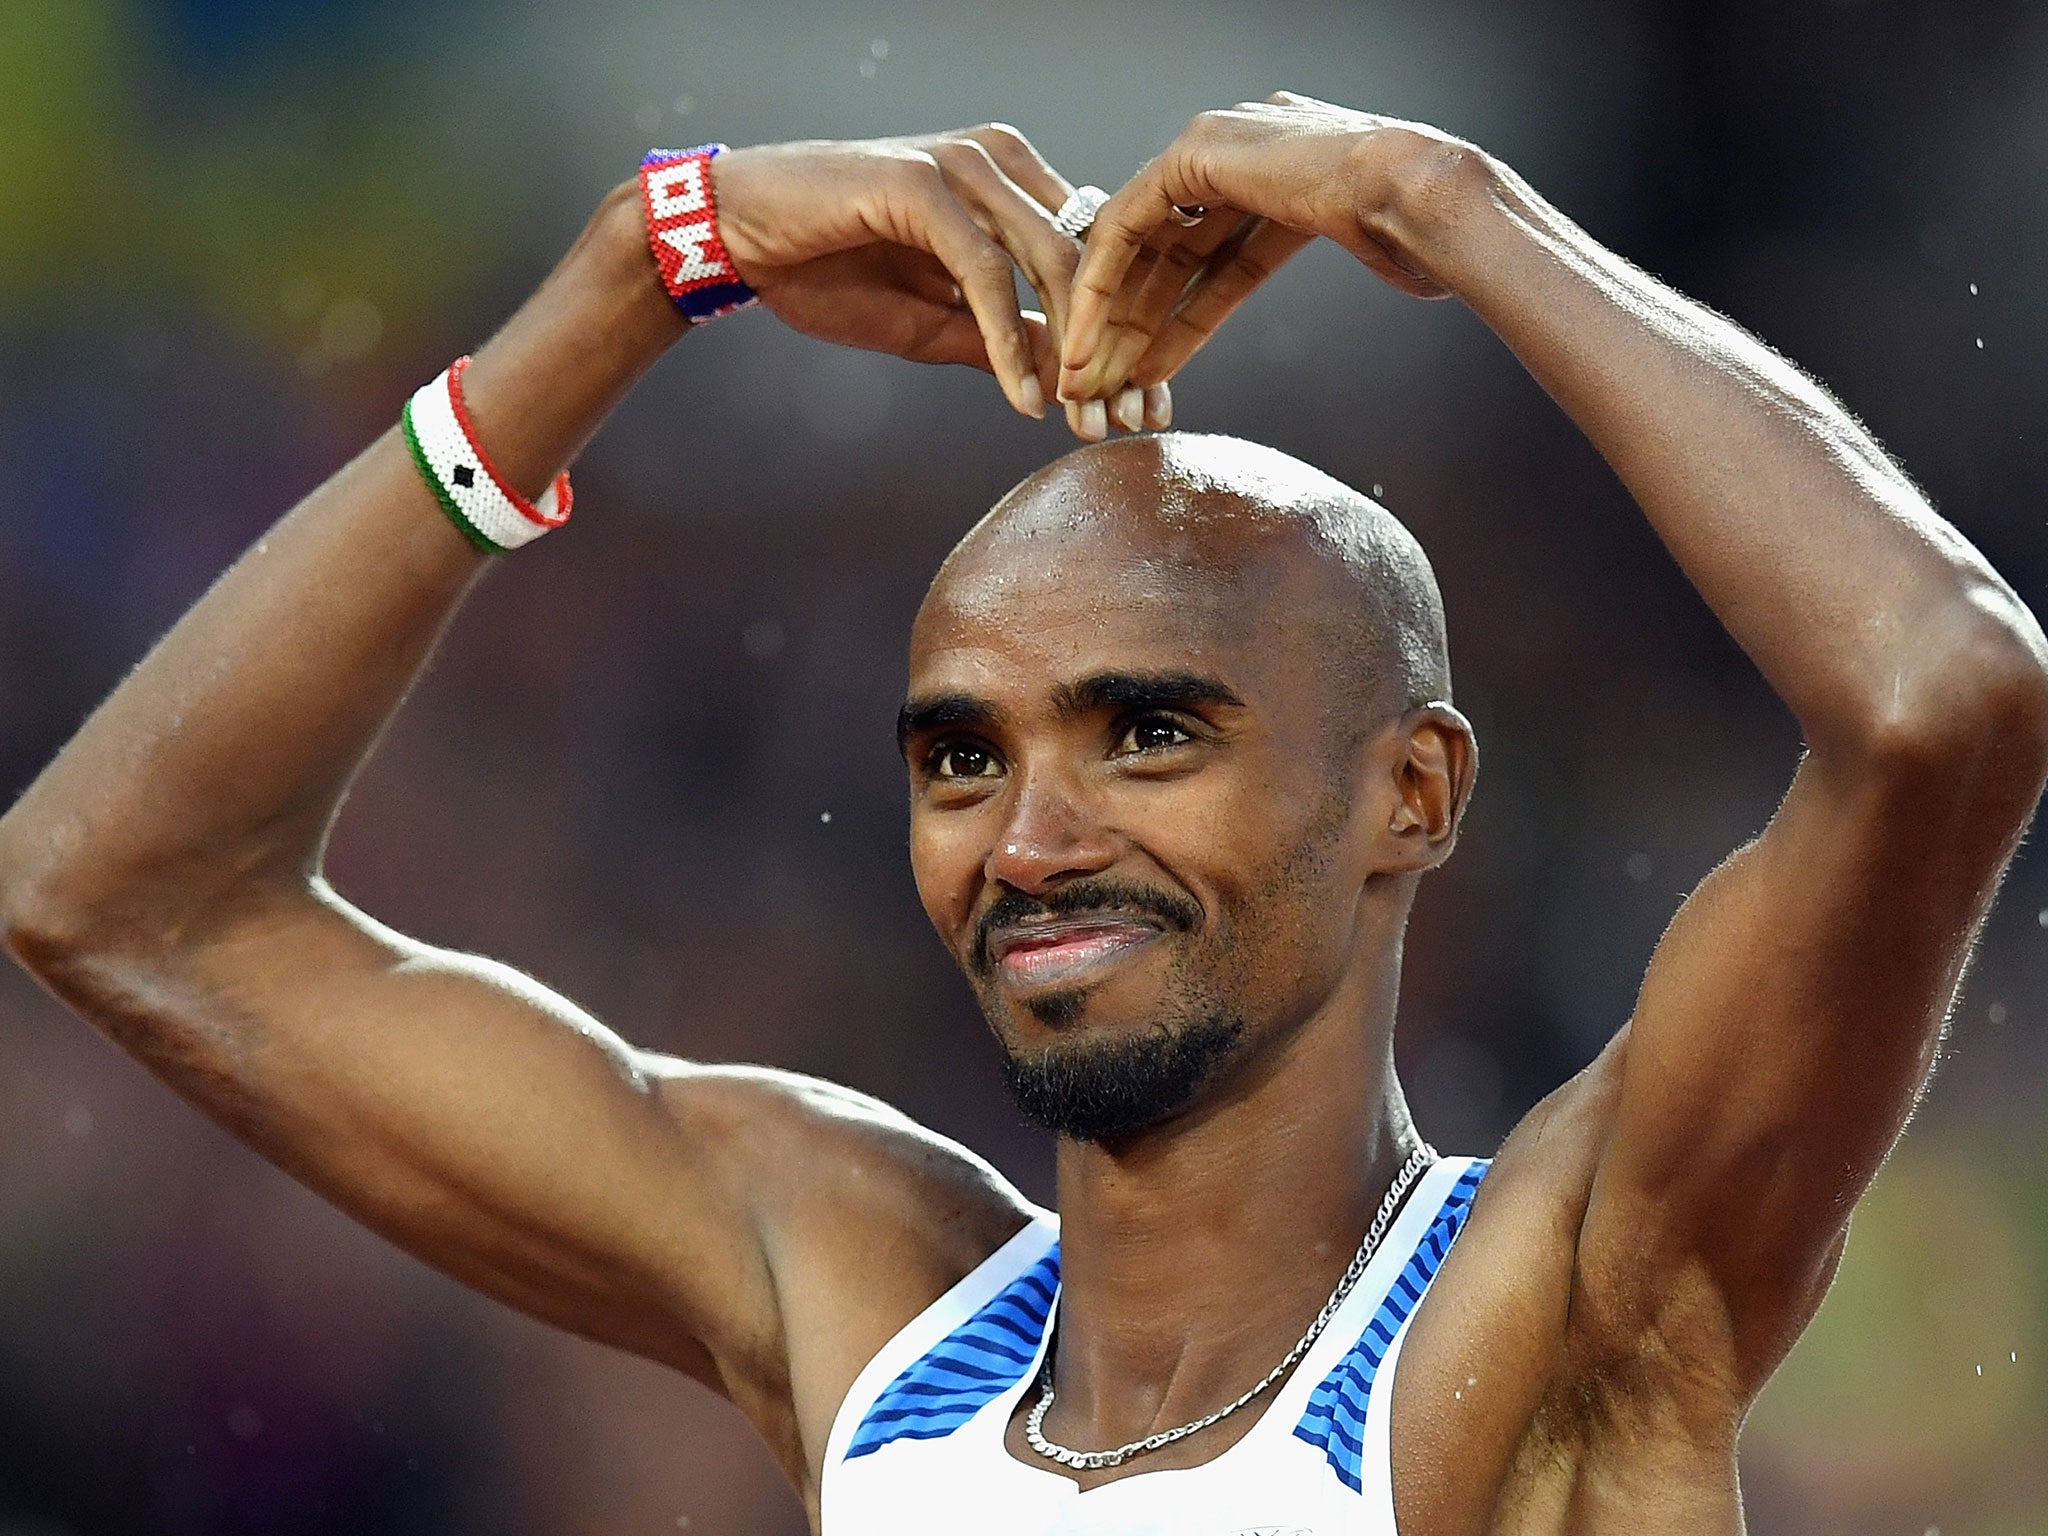 Mo Farah is favourite to take gold in the men's 5,000m final